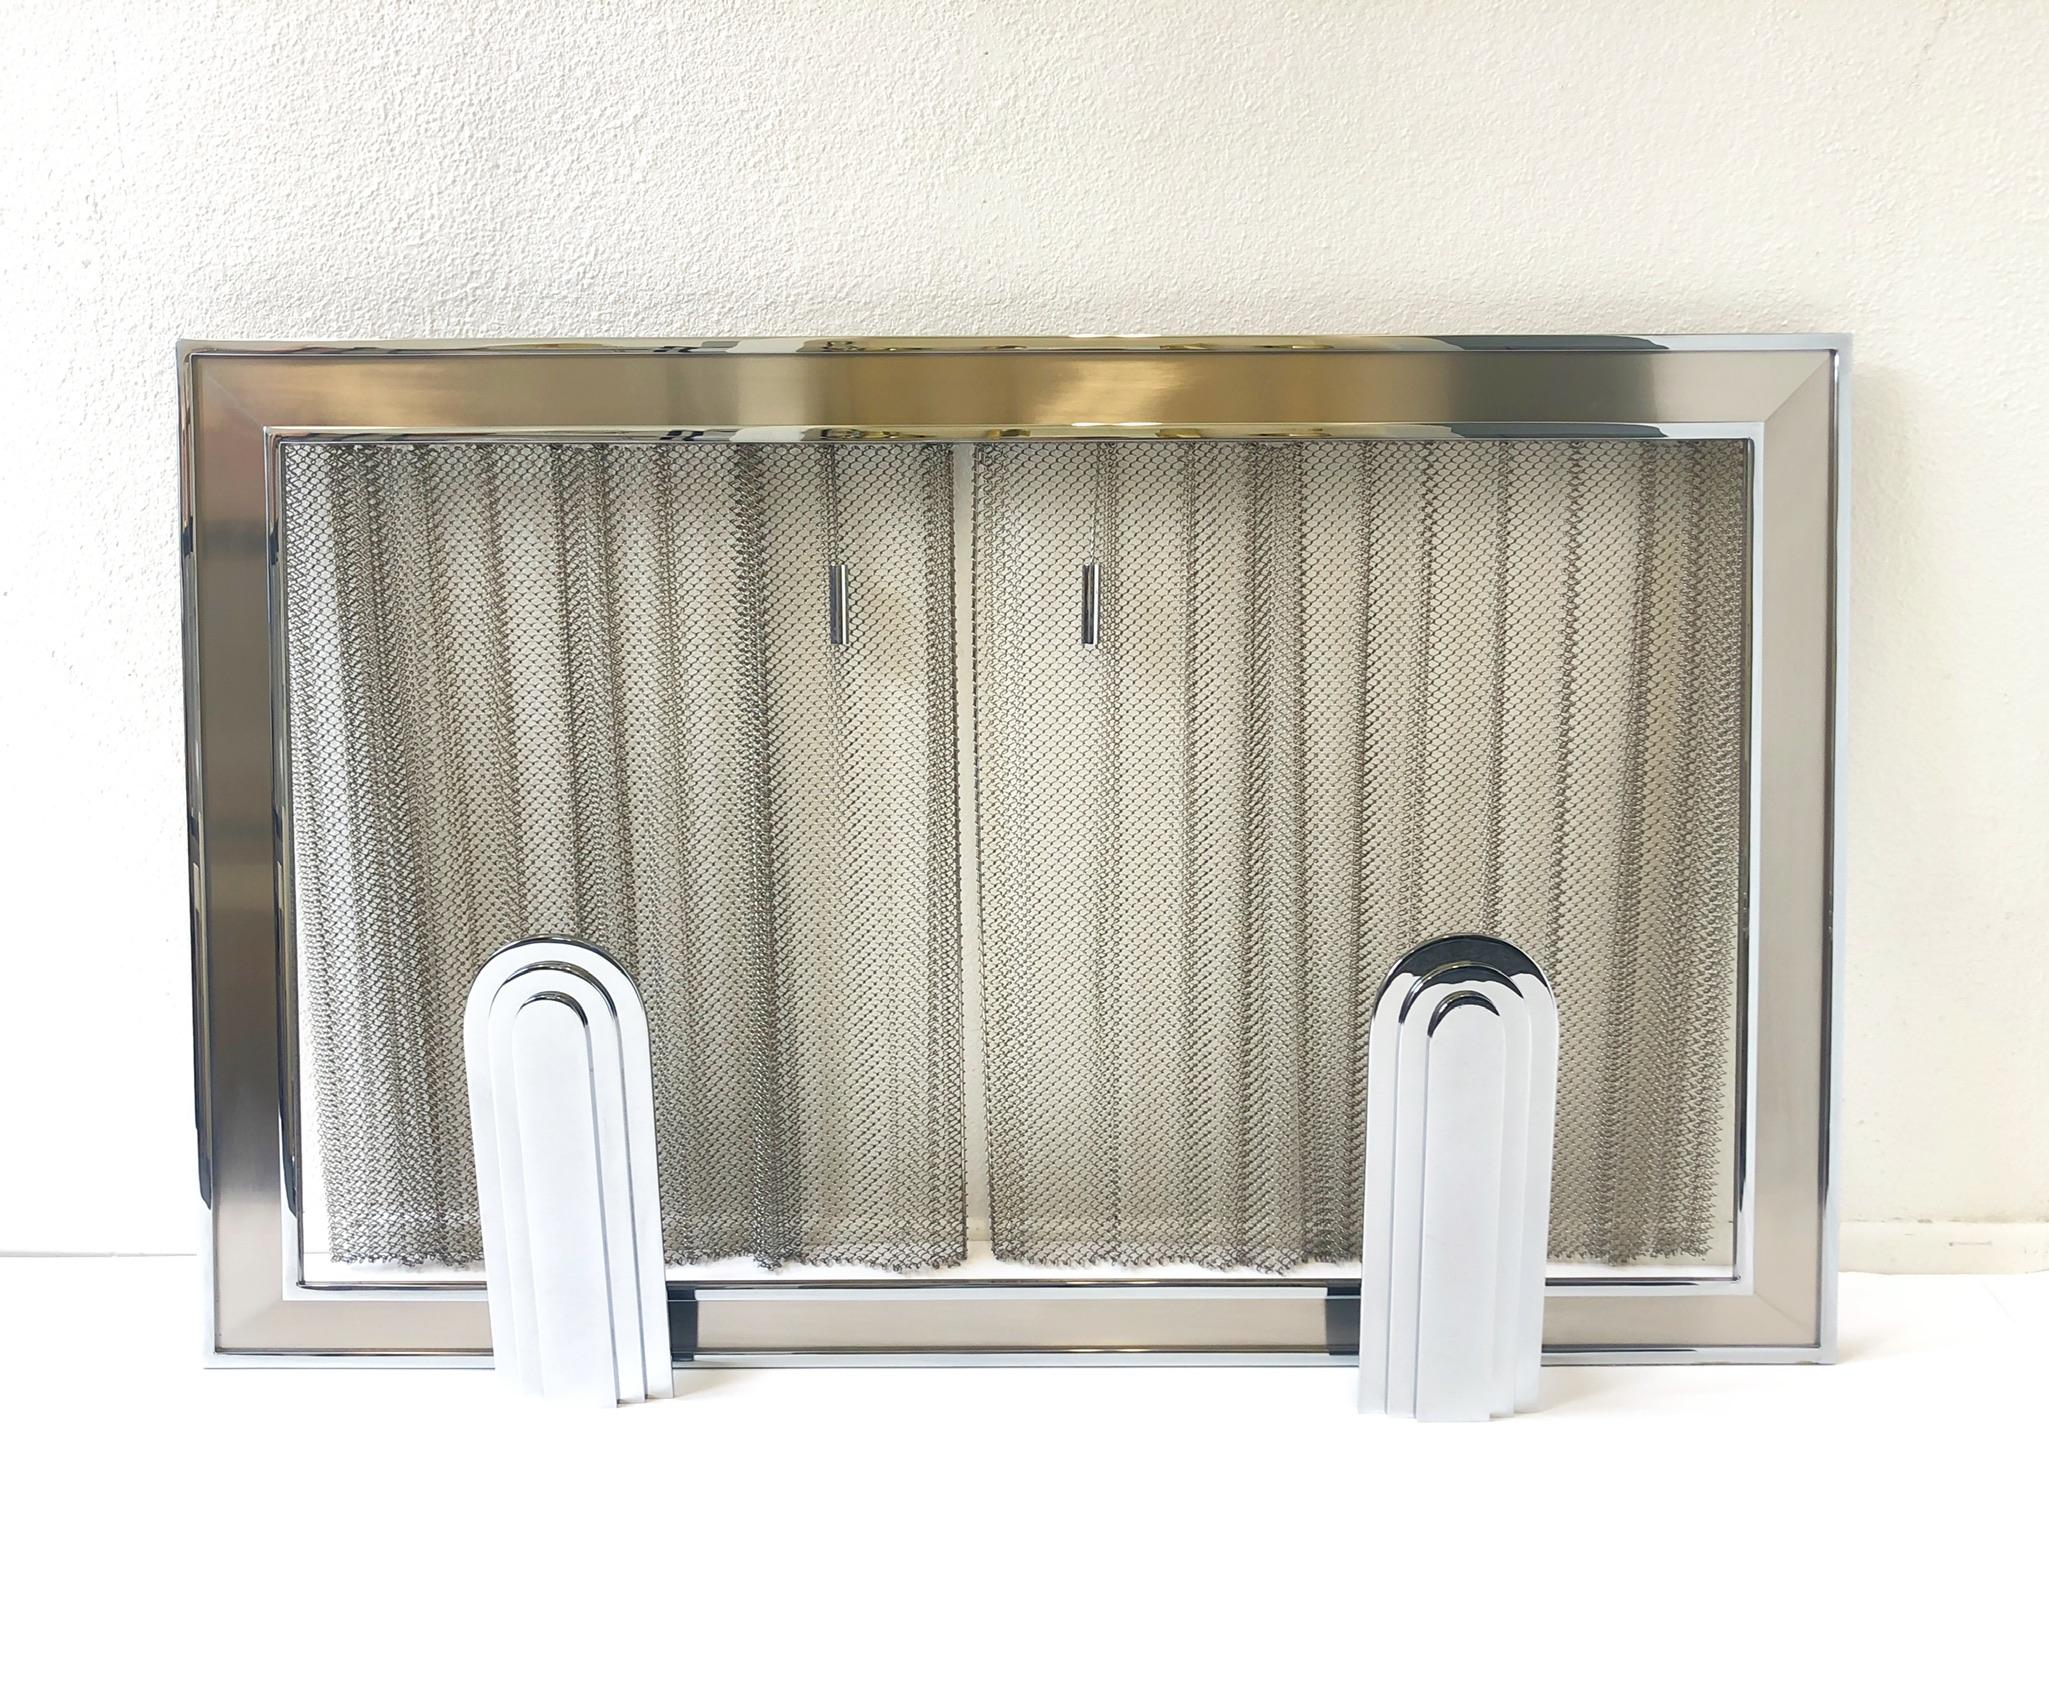 A rare polish chrome French fireplace set designed by Maison Charles in the 1970s.
The set consists of fireplace tool set, andirons, gas key and fireplace screen. The fireplace screen is polish and brushed chrome. The fireplace tools, andirons and